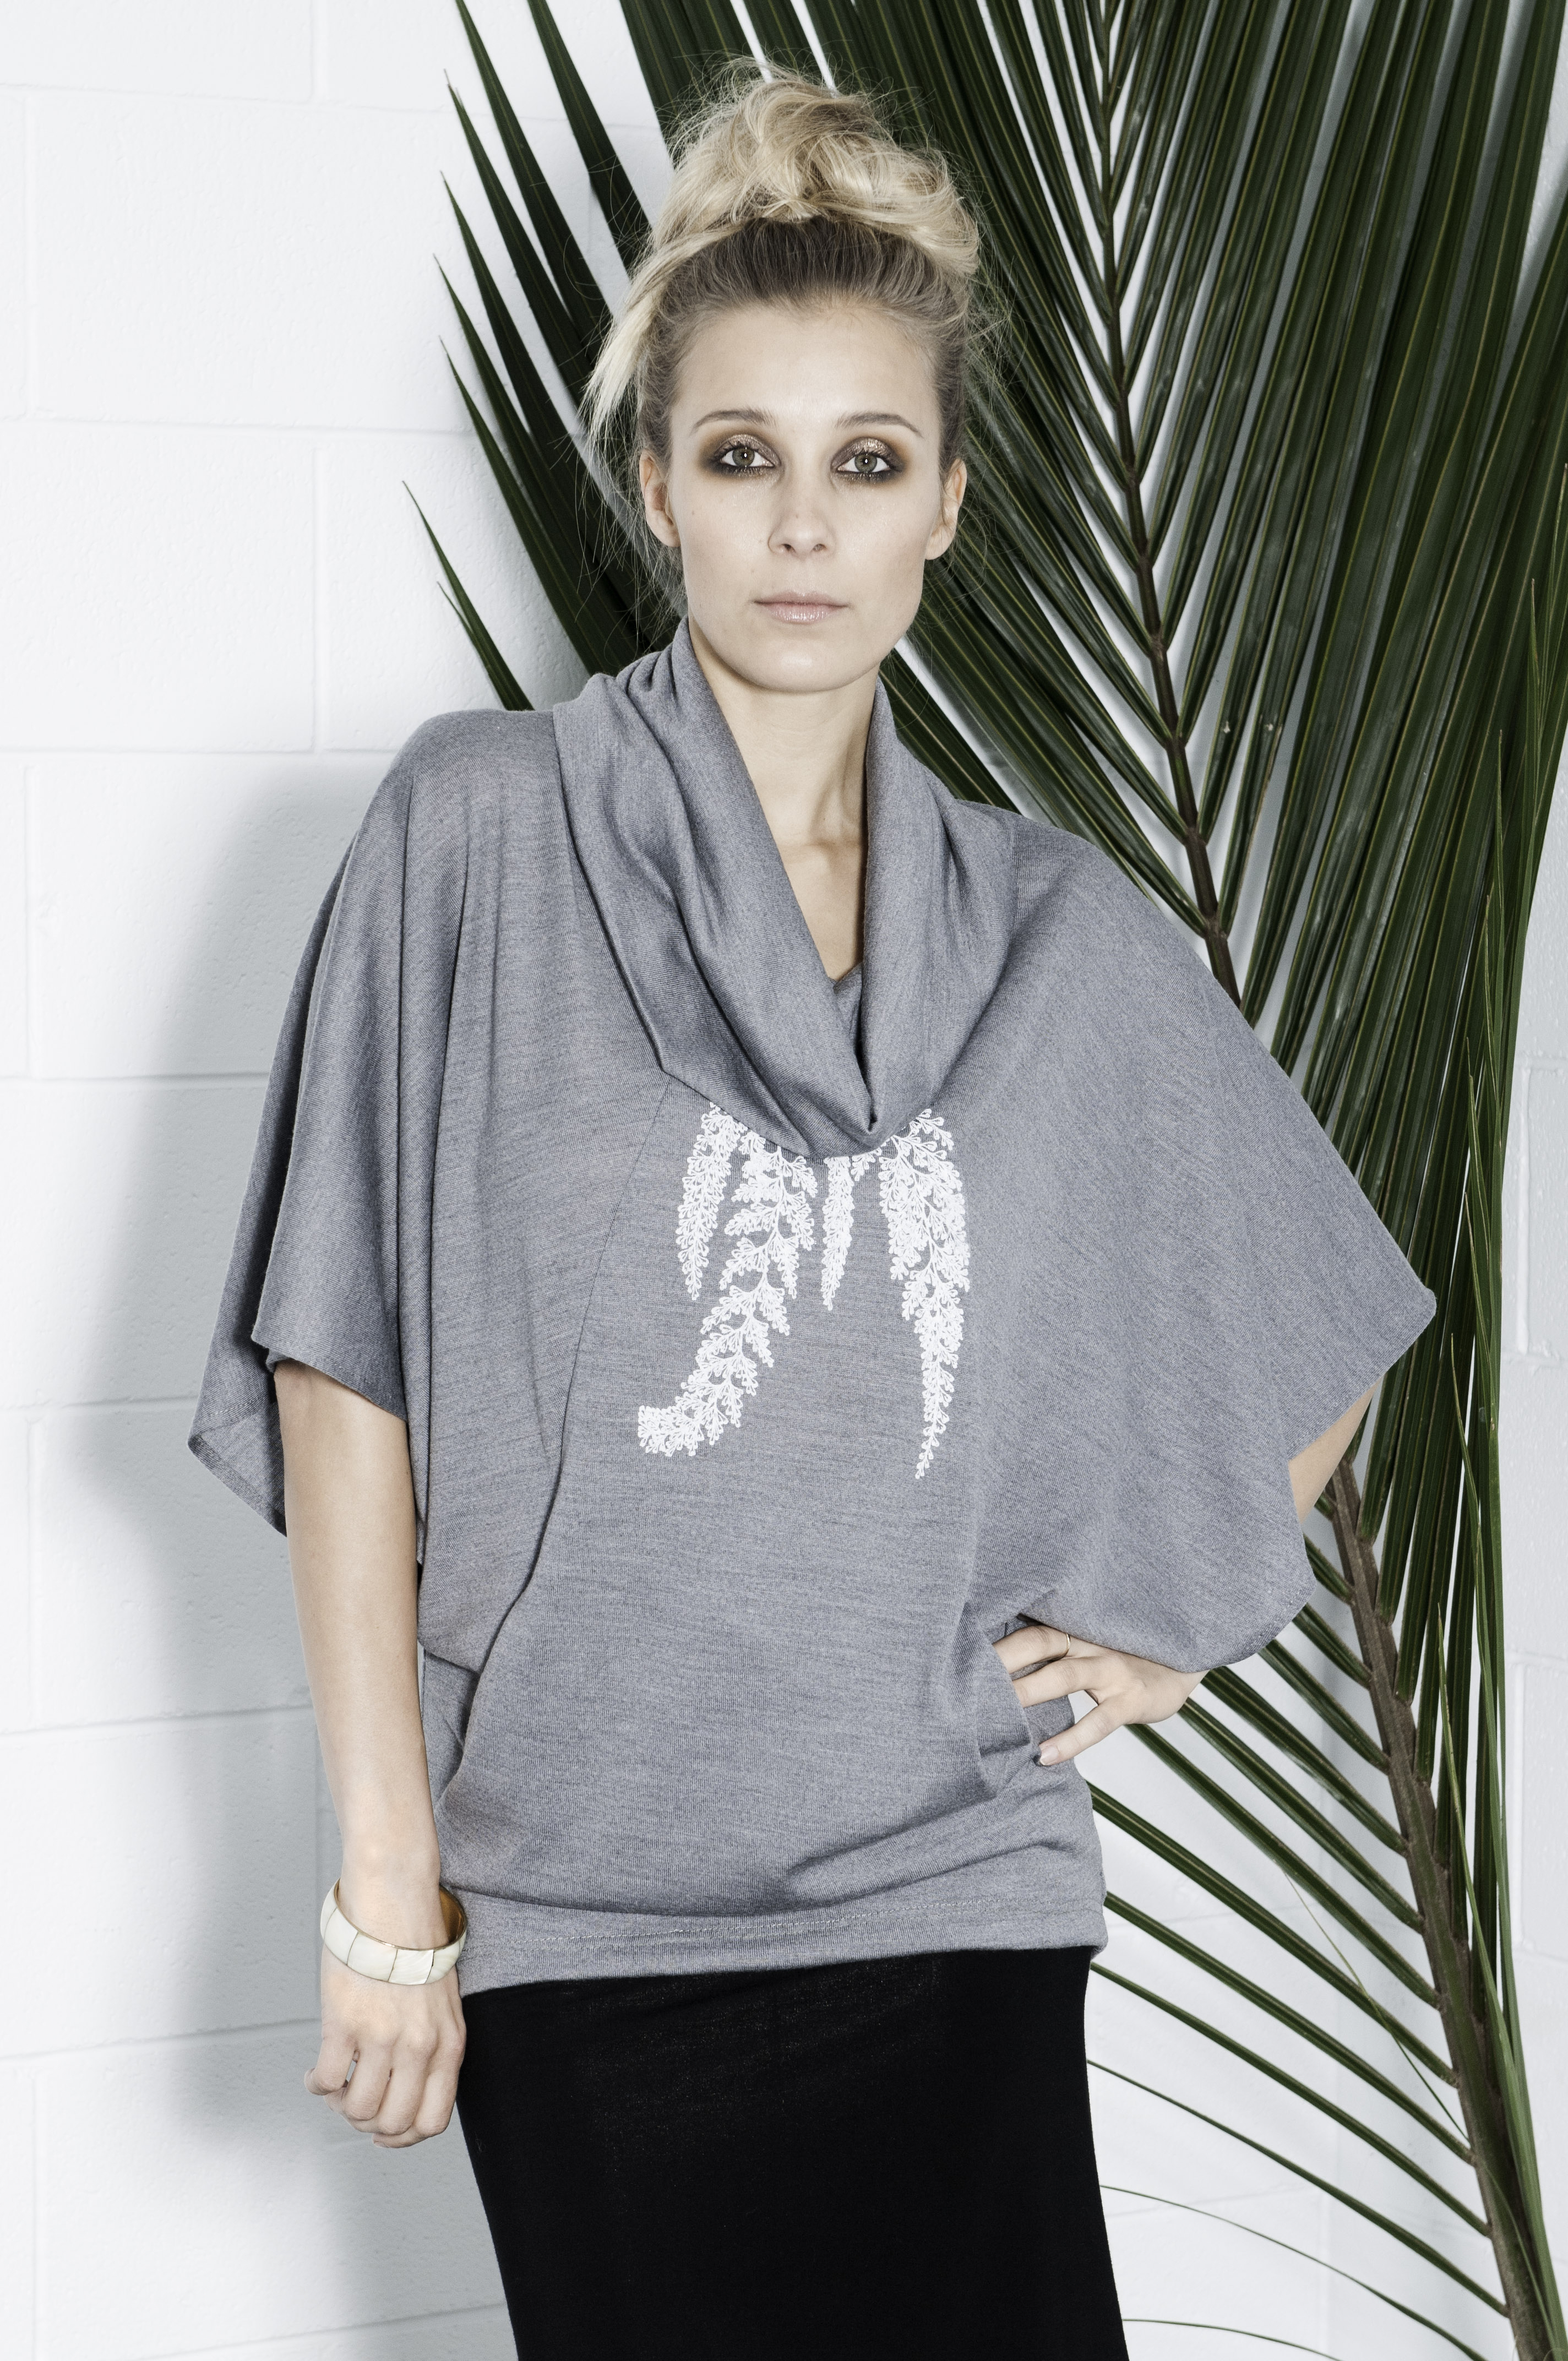 Chic oversized top with silver fern Auckland Fashion by Sera Mitchinson Selctor photographer Anais C